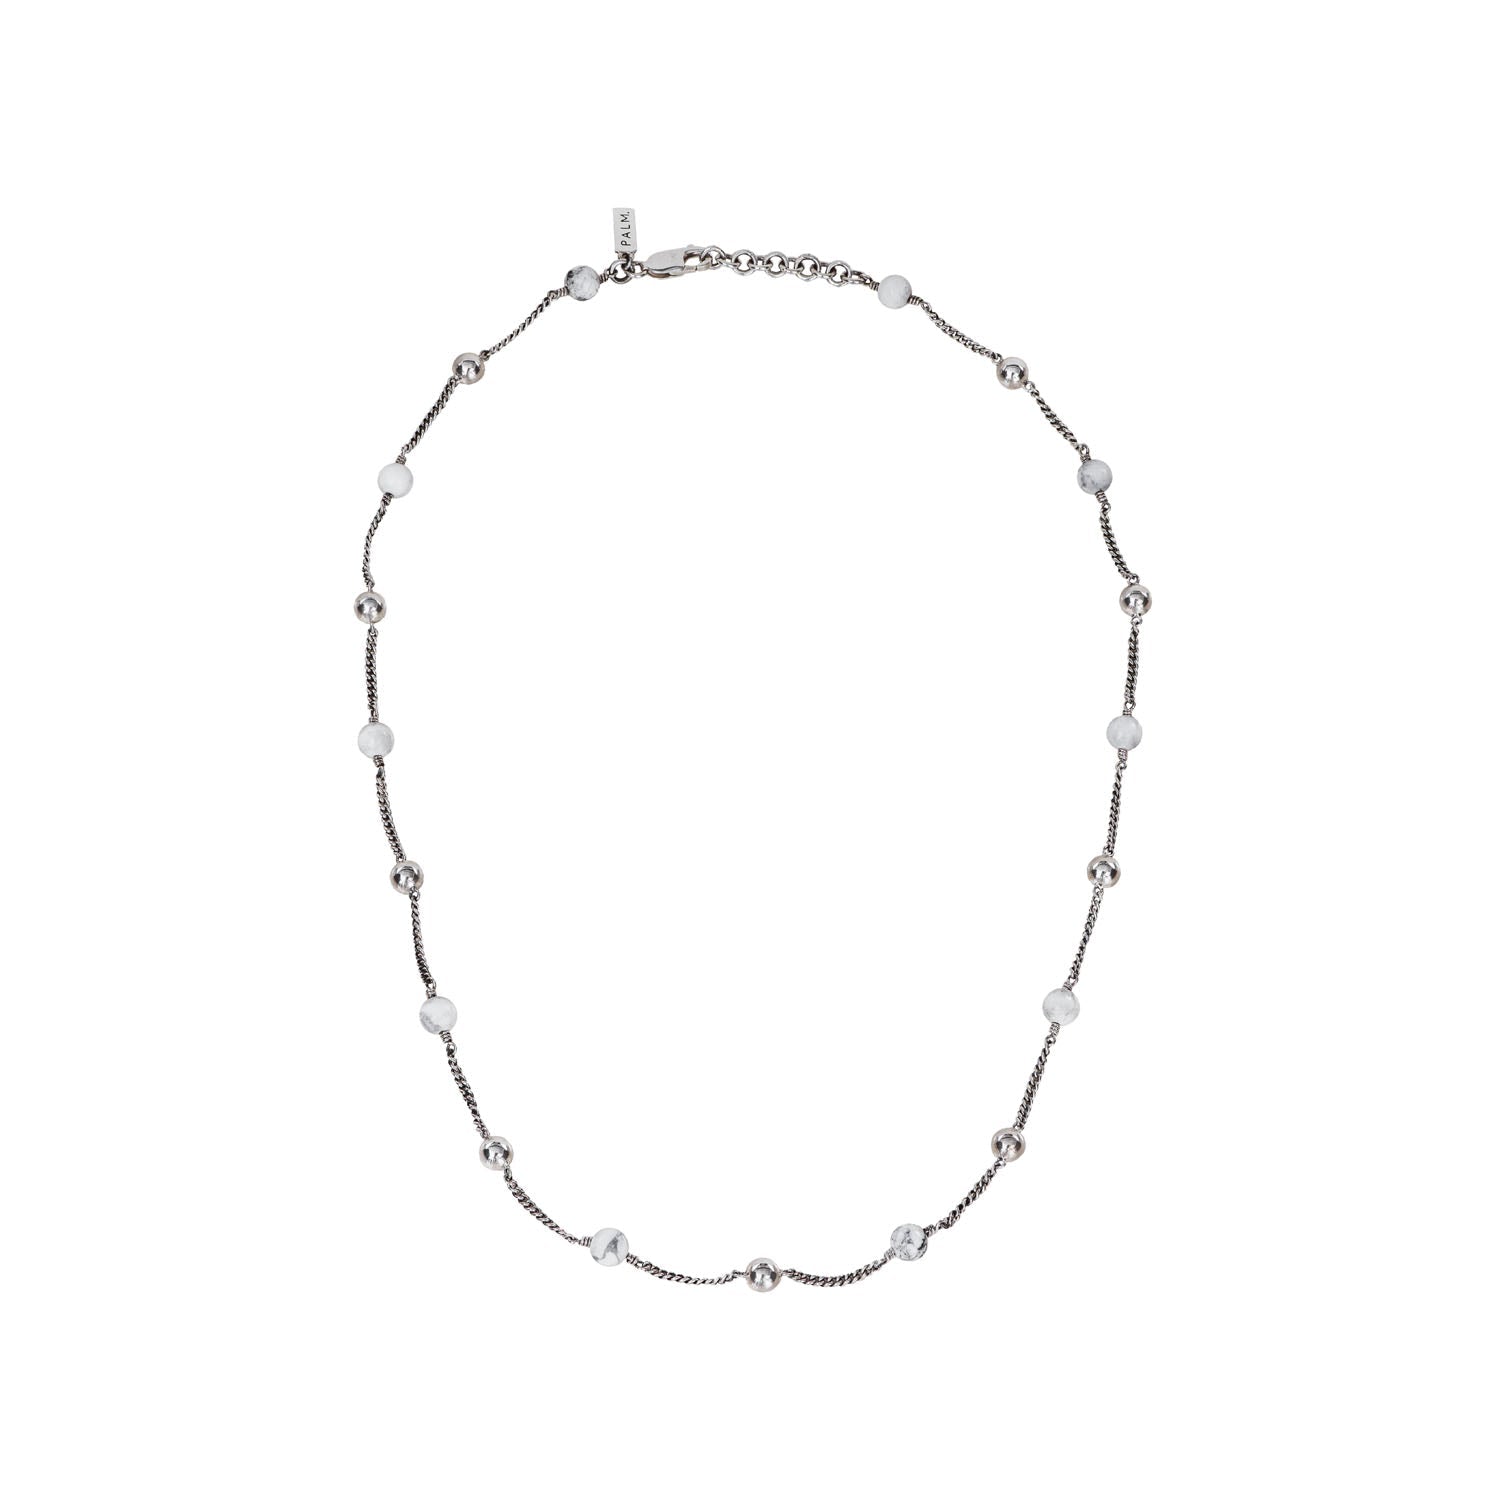 HOWLITE CHAIN. - 925 Silver Chain Howlite Stones 5.5mm - PALM. | Handcrafted Jewelry-